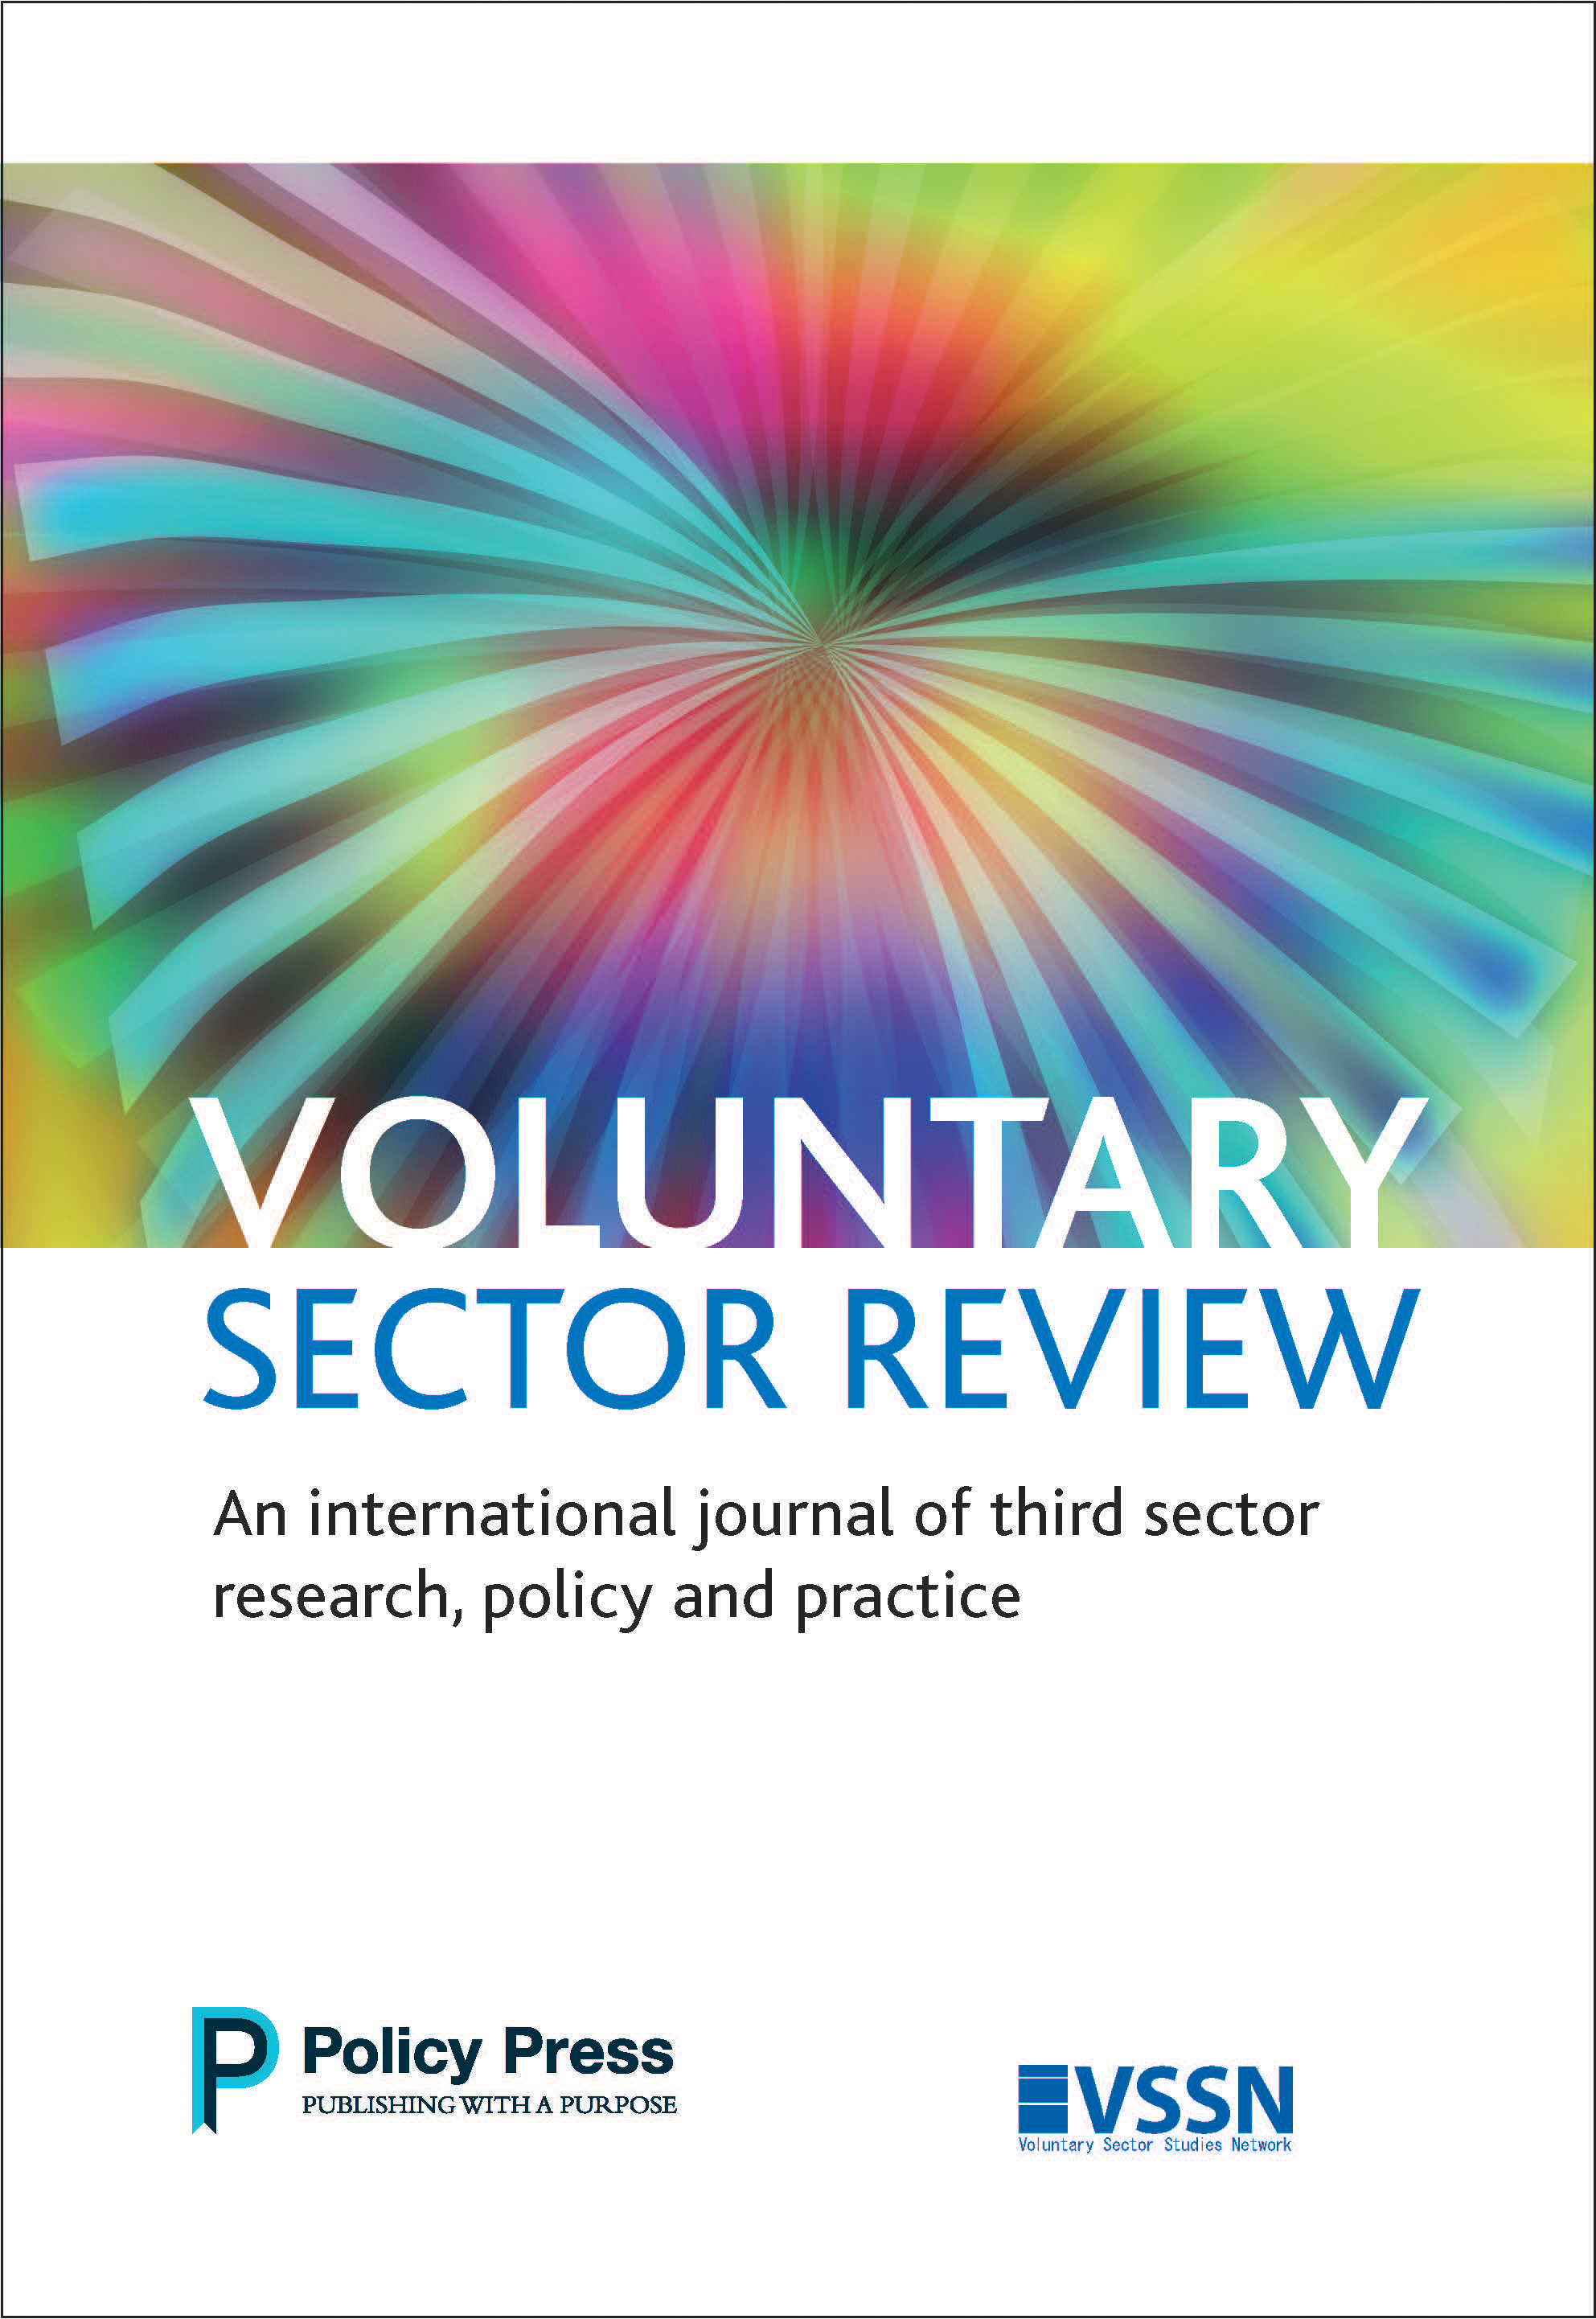 Voluntary Sector Review: Introducing a new editorial team